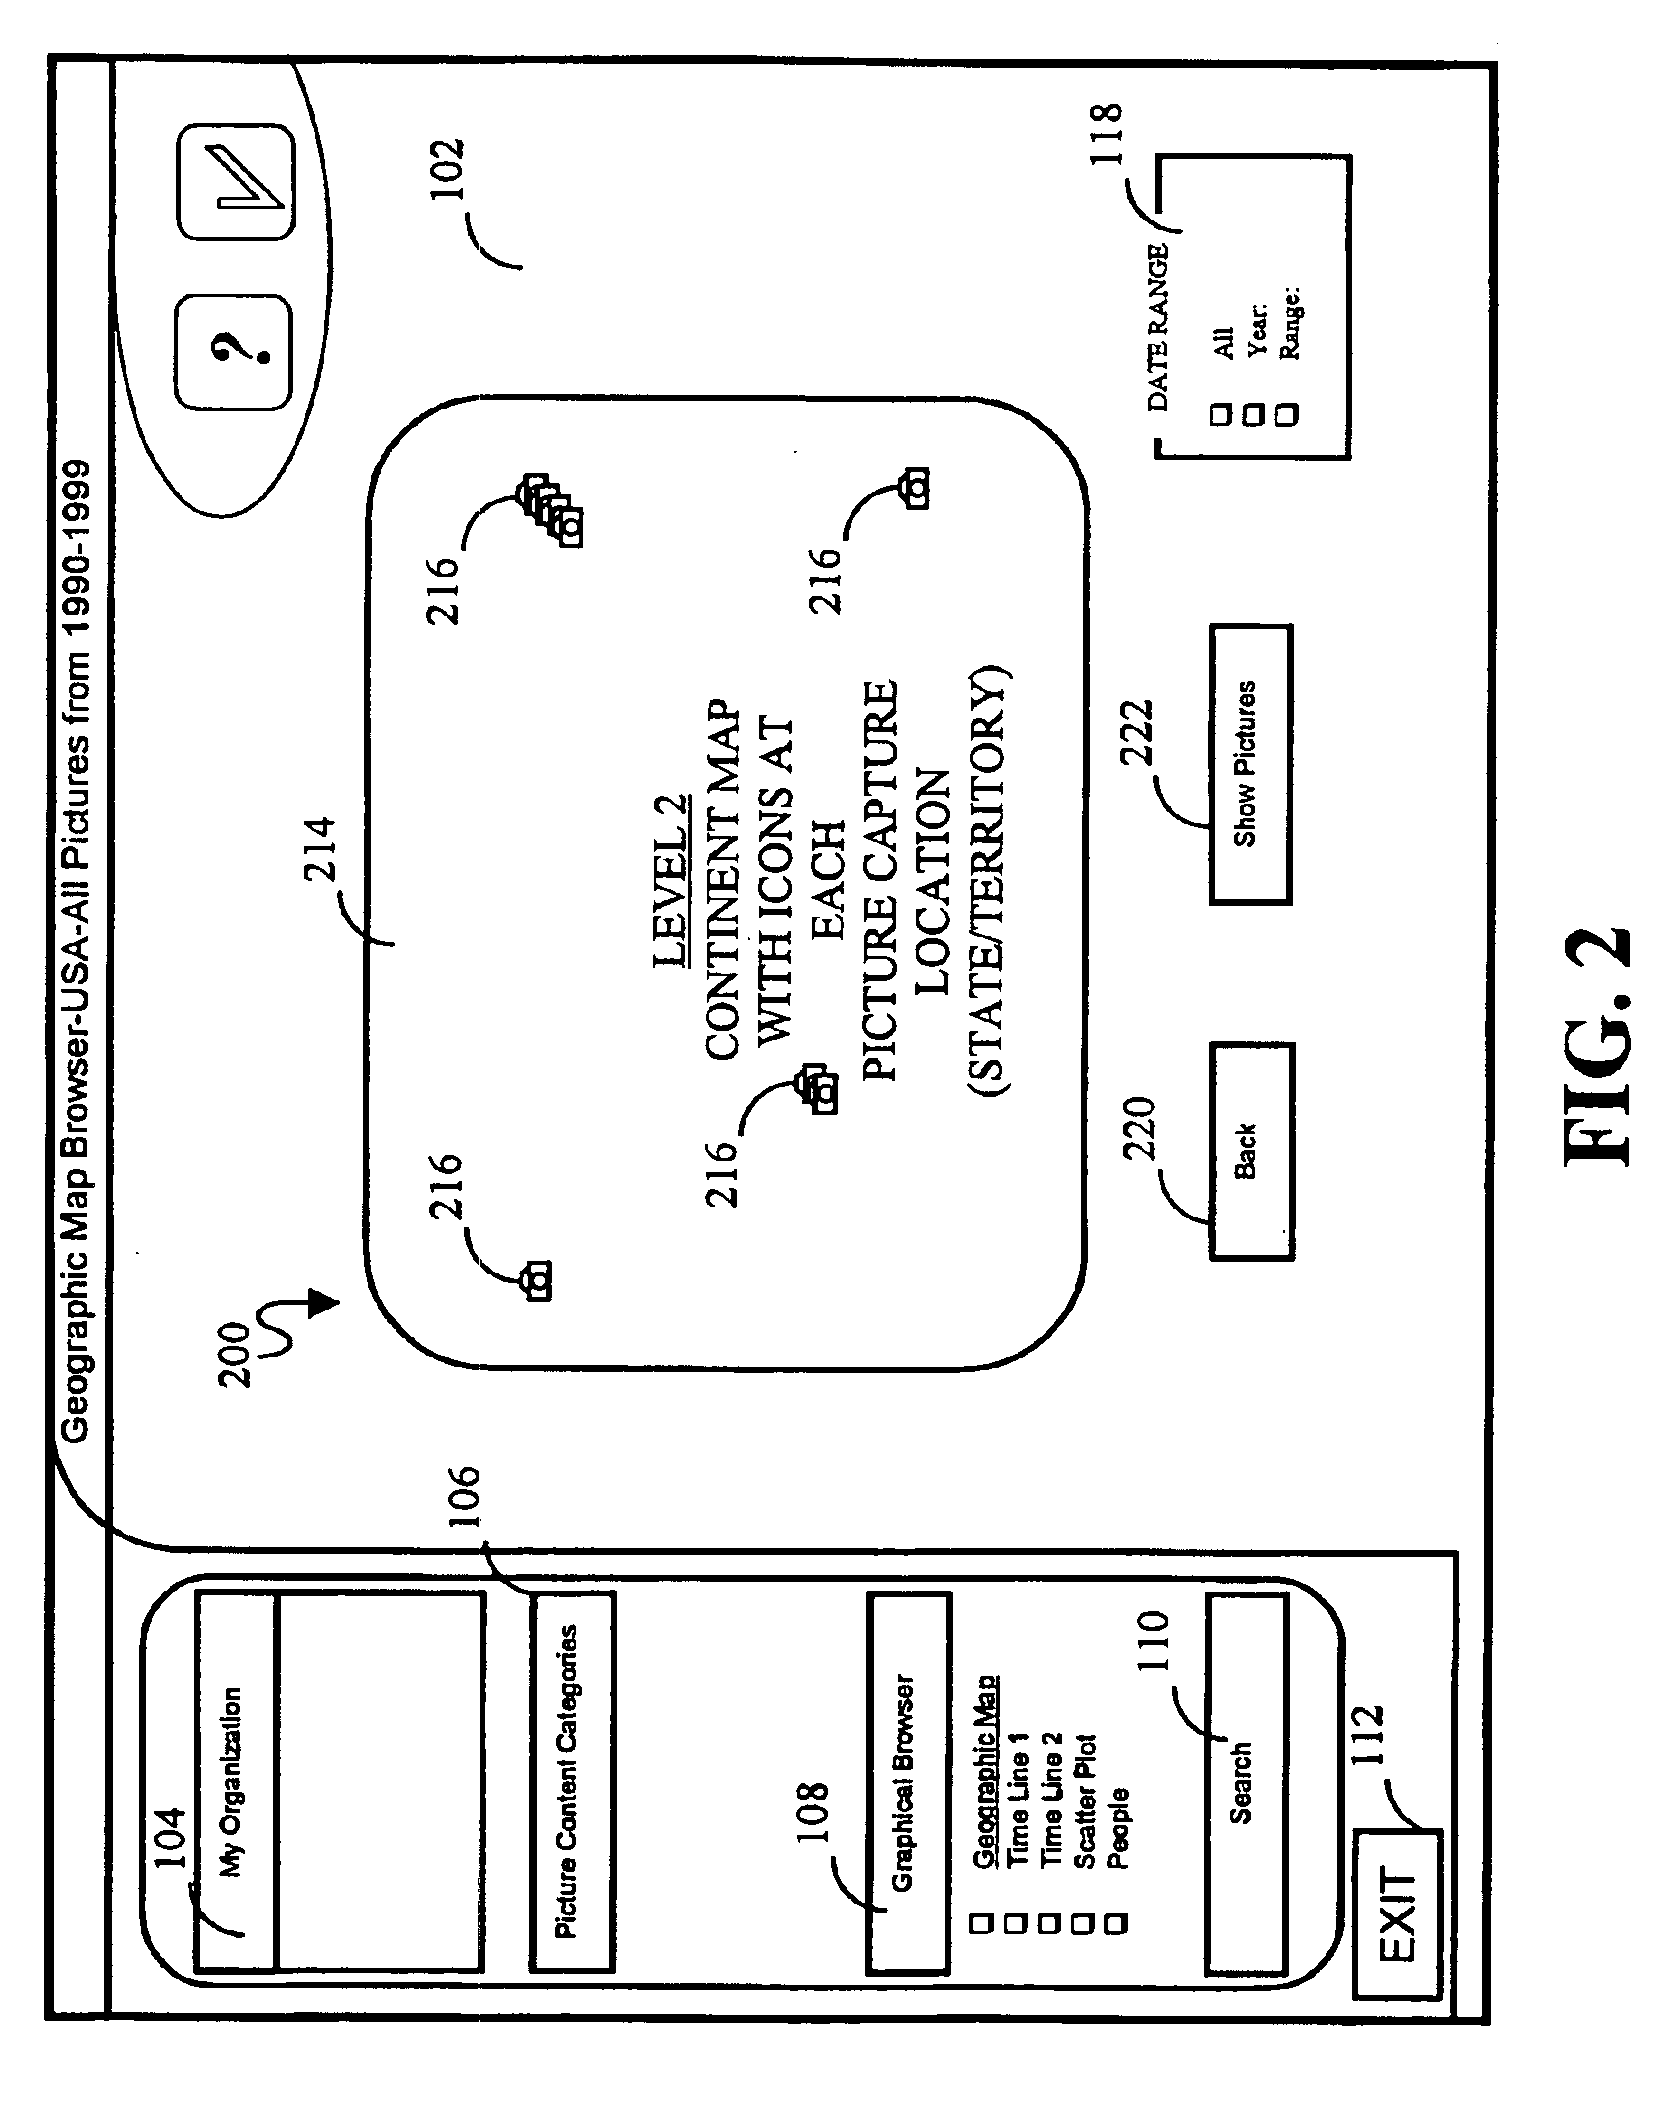 Picture database graphical user interface utilizing map-based metaphors for efficient browsing and retrieving of pictures